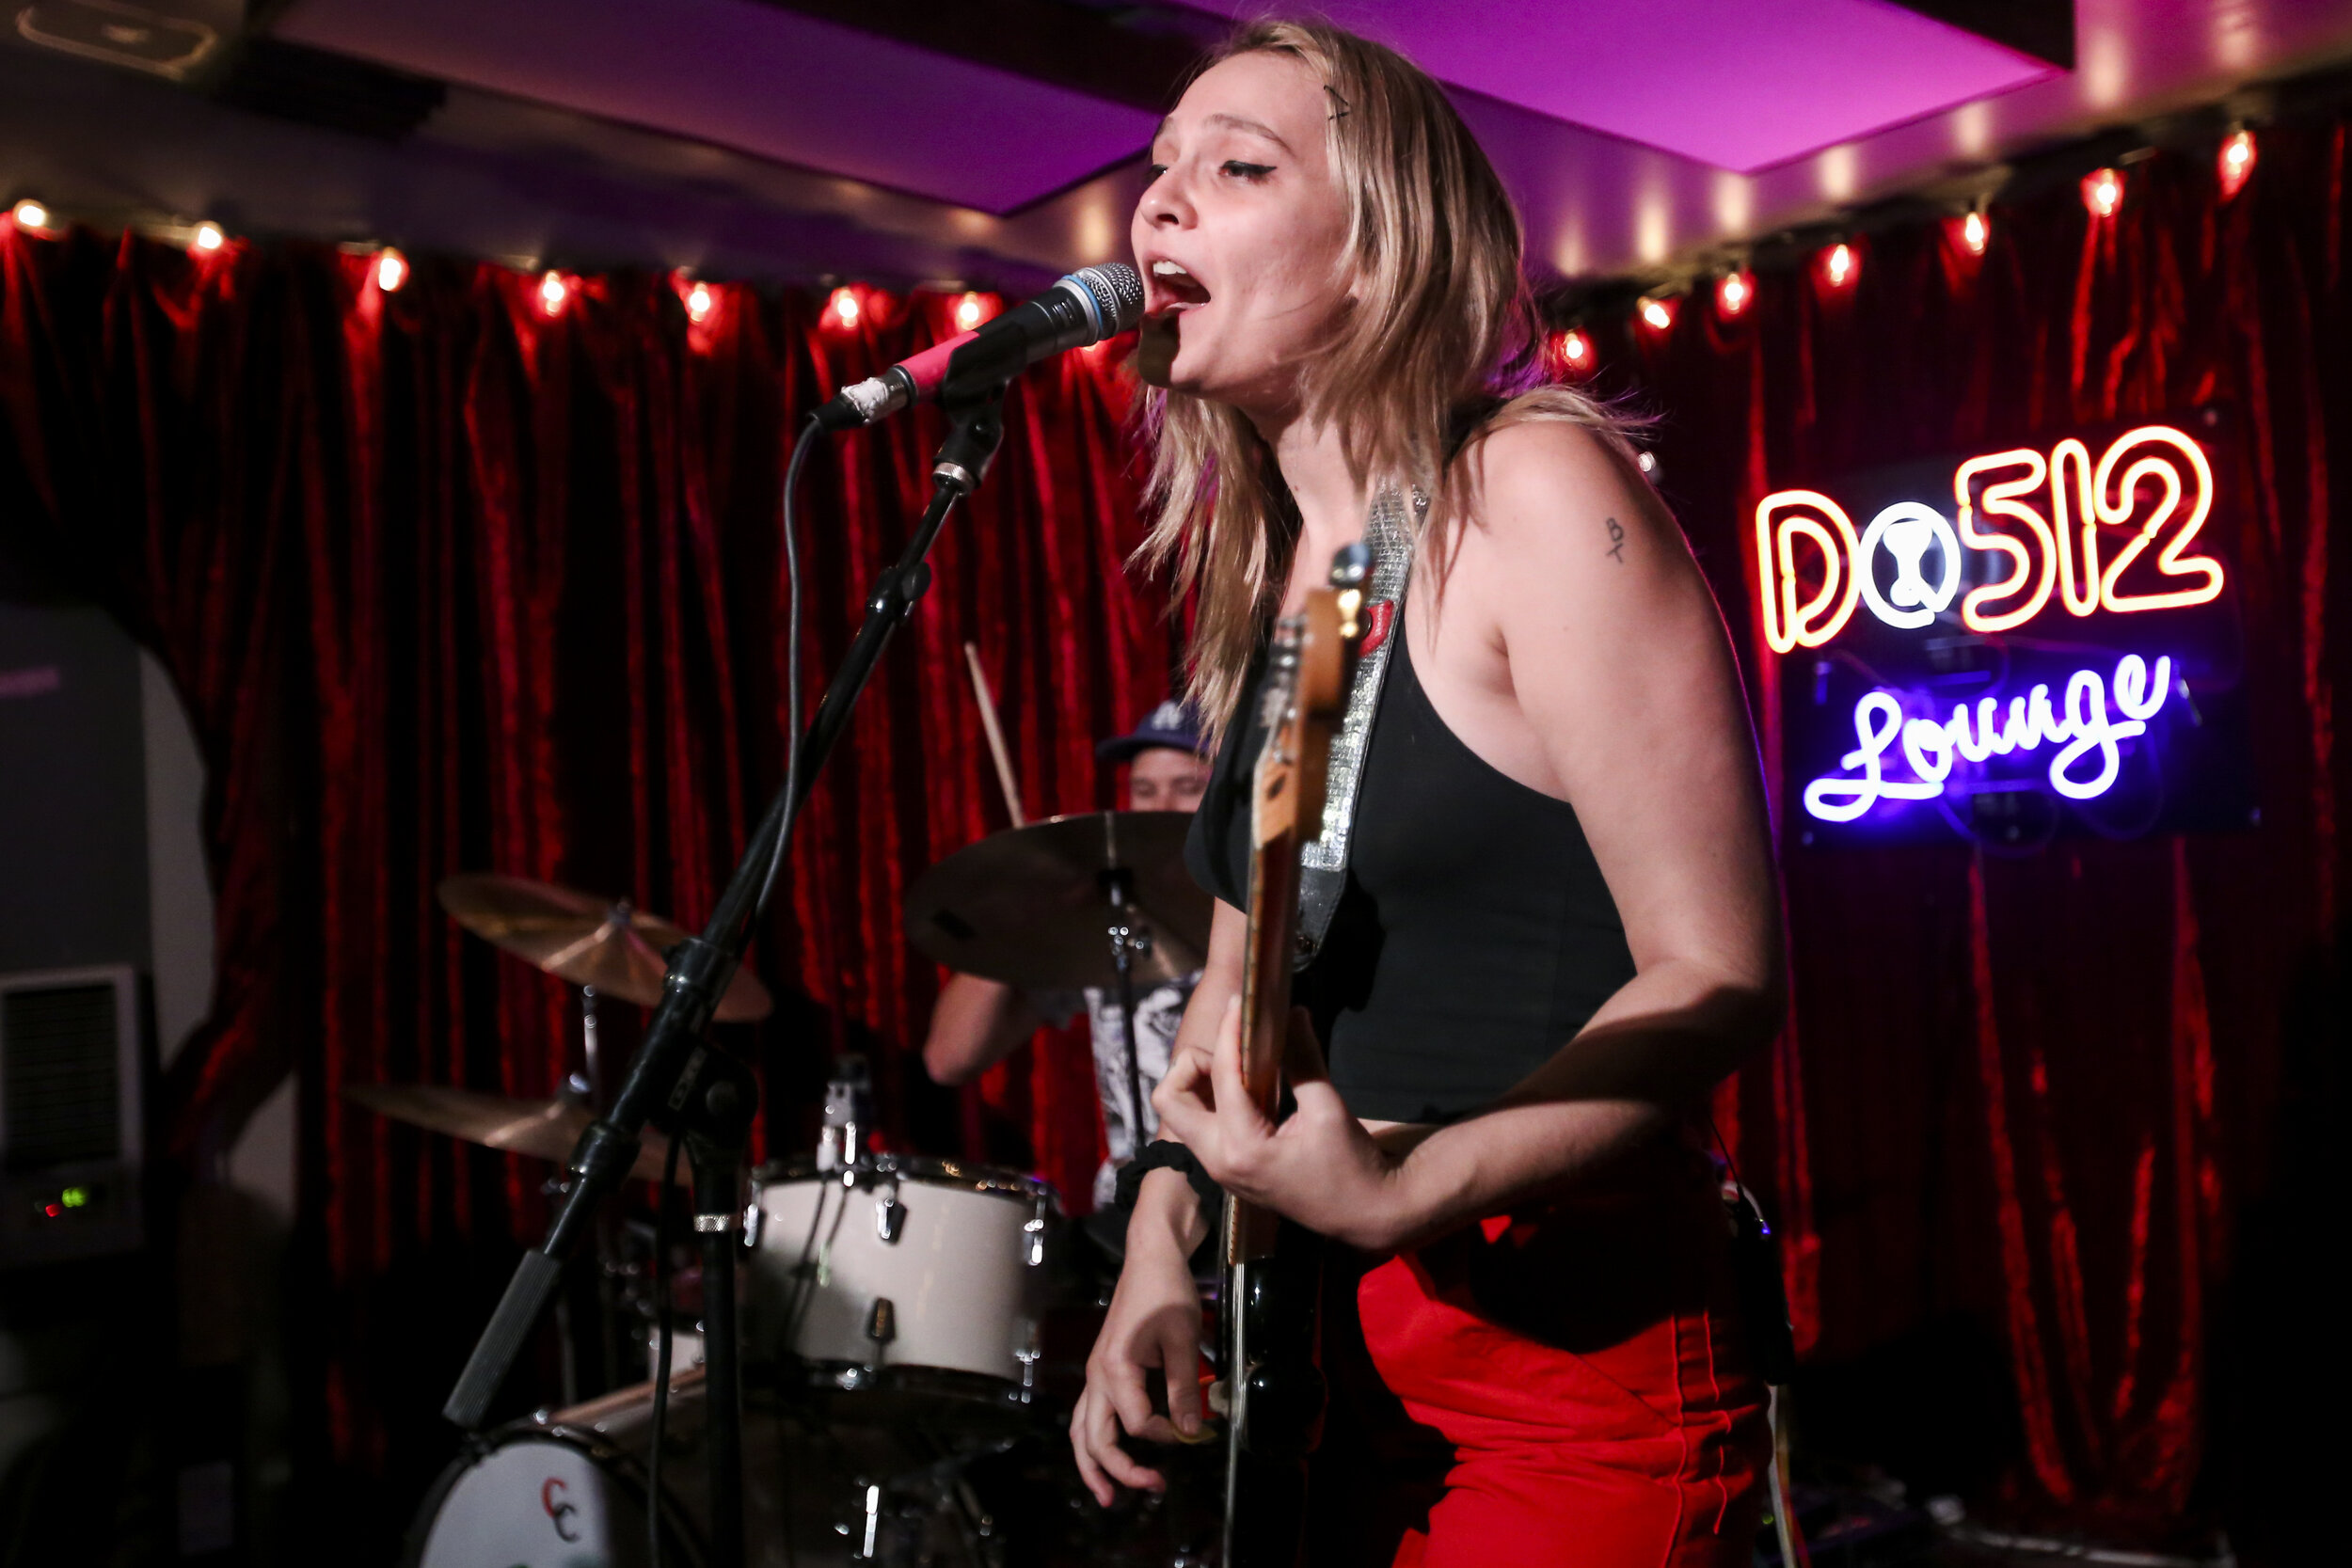  Cherry Glazerr performs at do512 following her performance at ACL. 